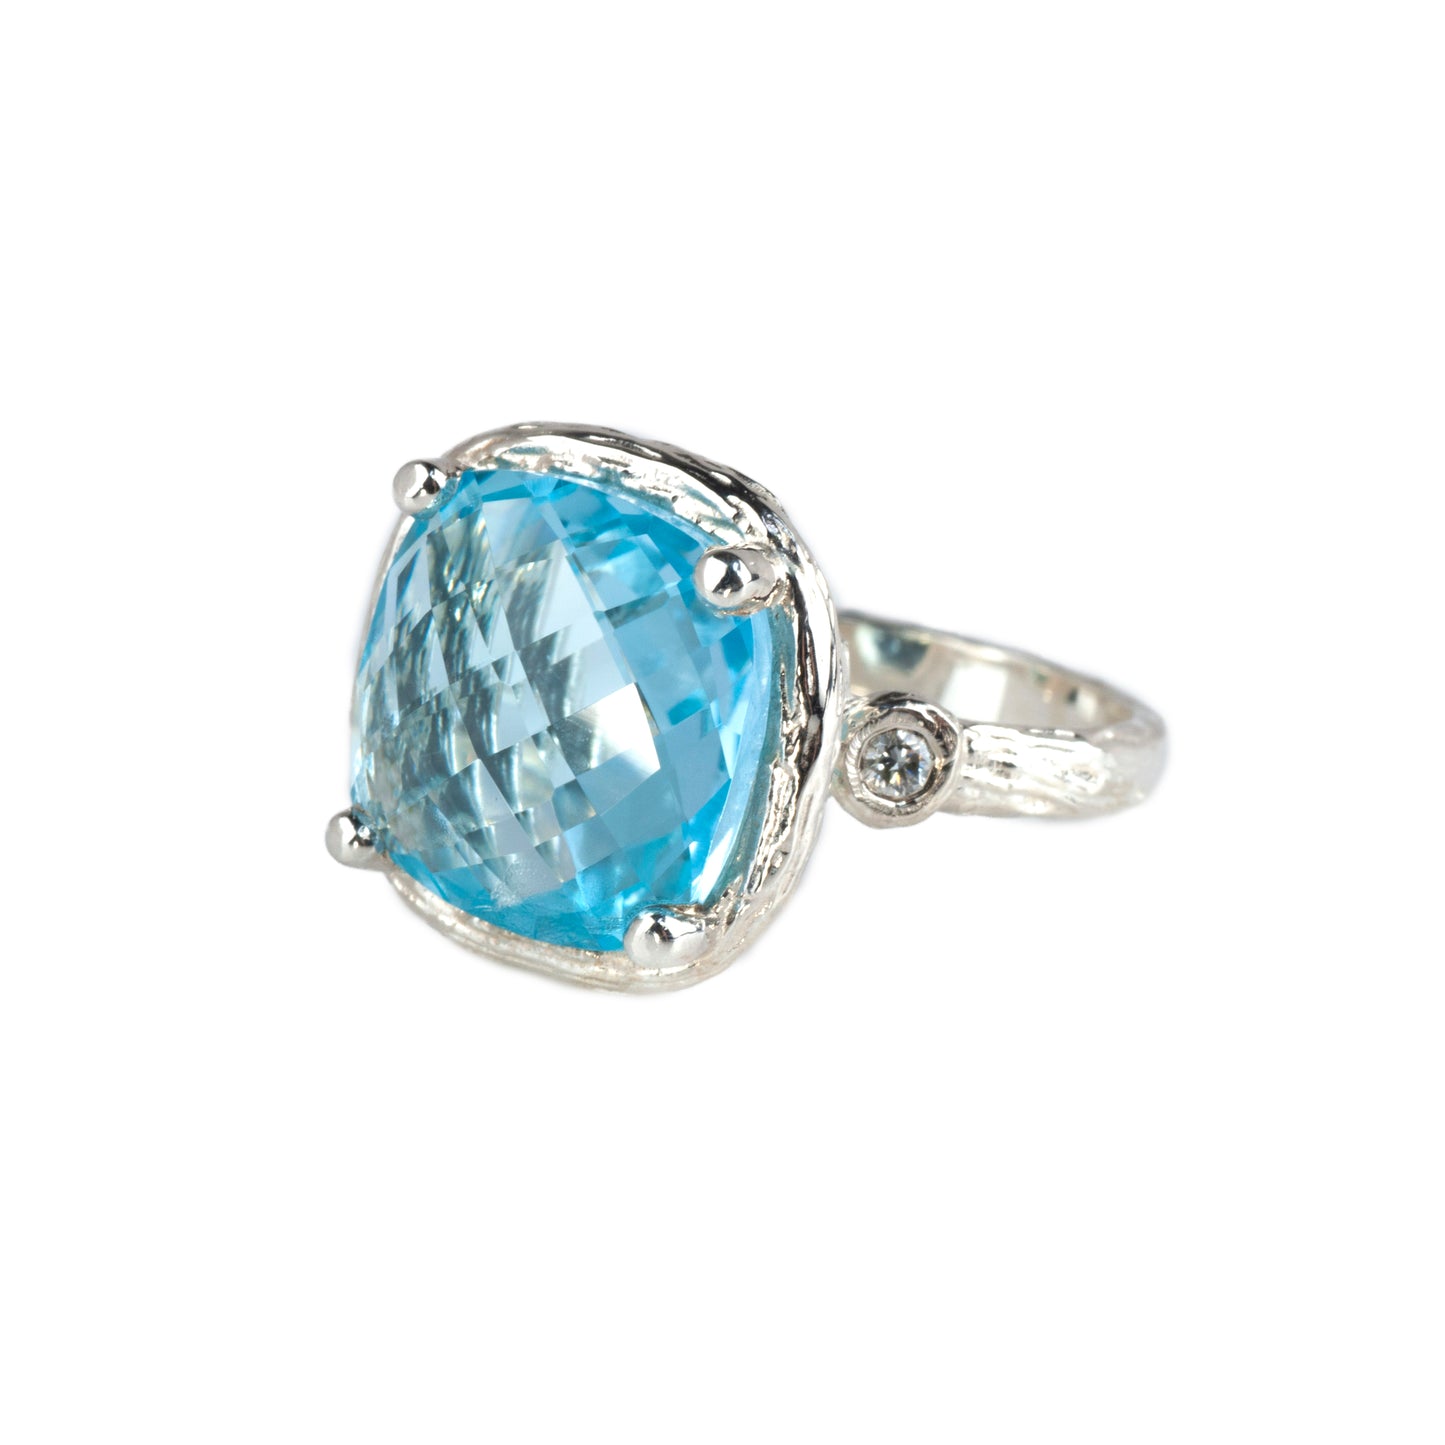 Riverbend Collection Sterling Silver Blue Topaz Ring